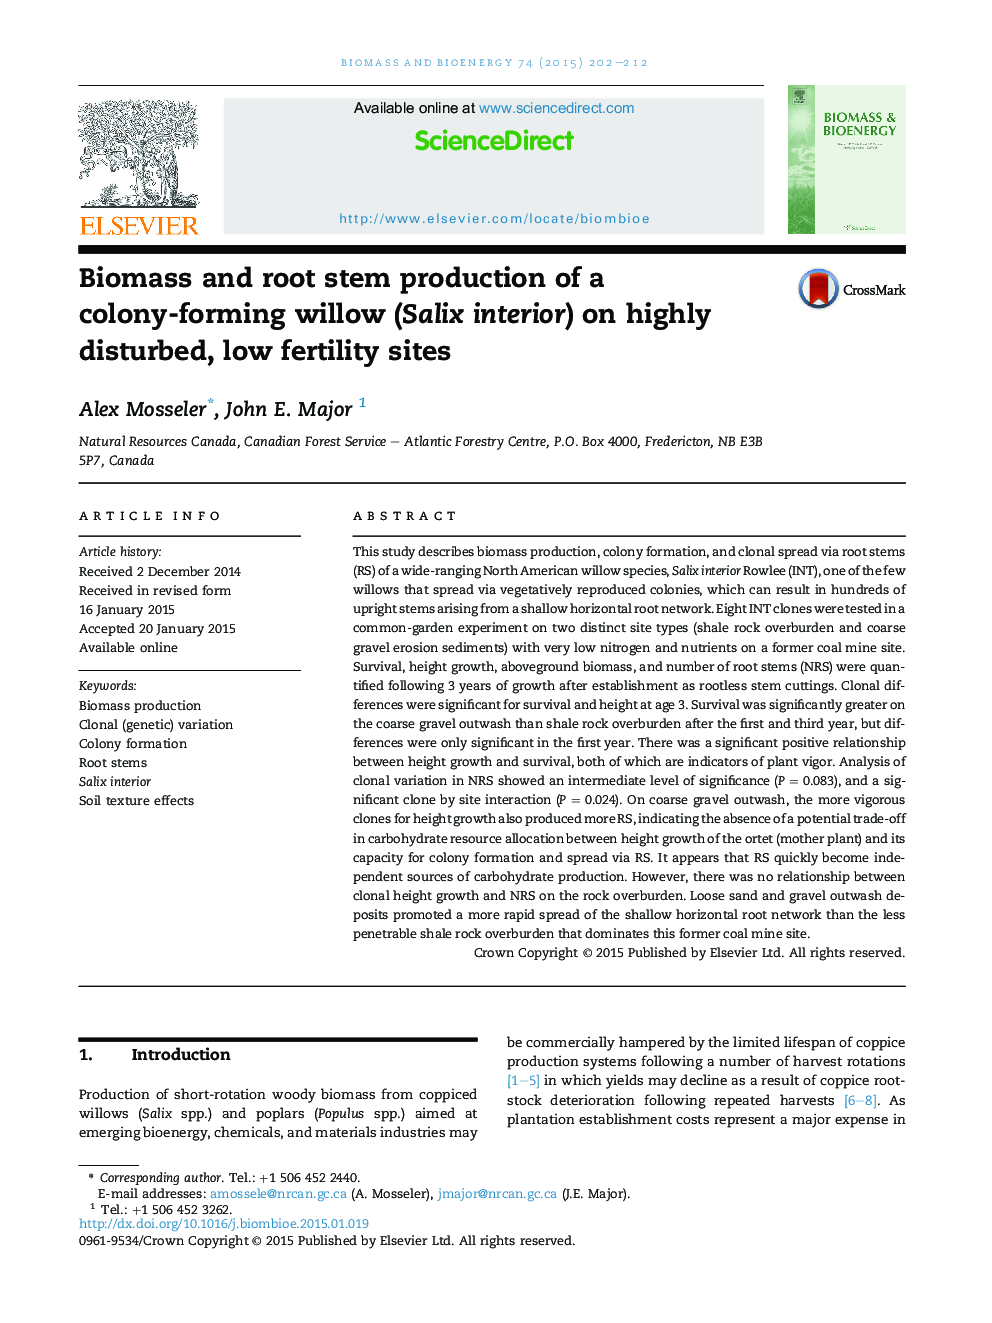 Biomass and root stem production of a colony-forming willow (Salix interior) on highly disturbed, low fertility sites